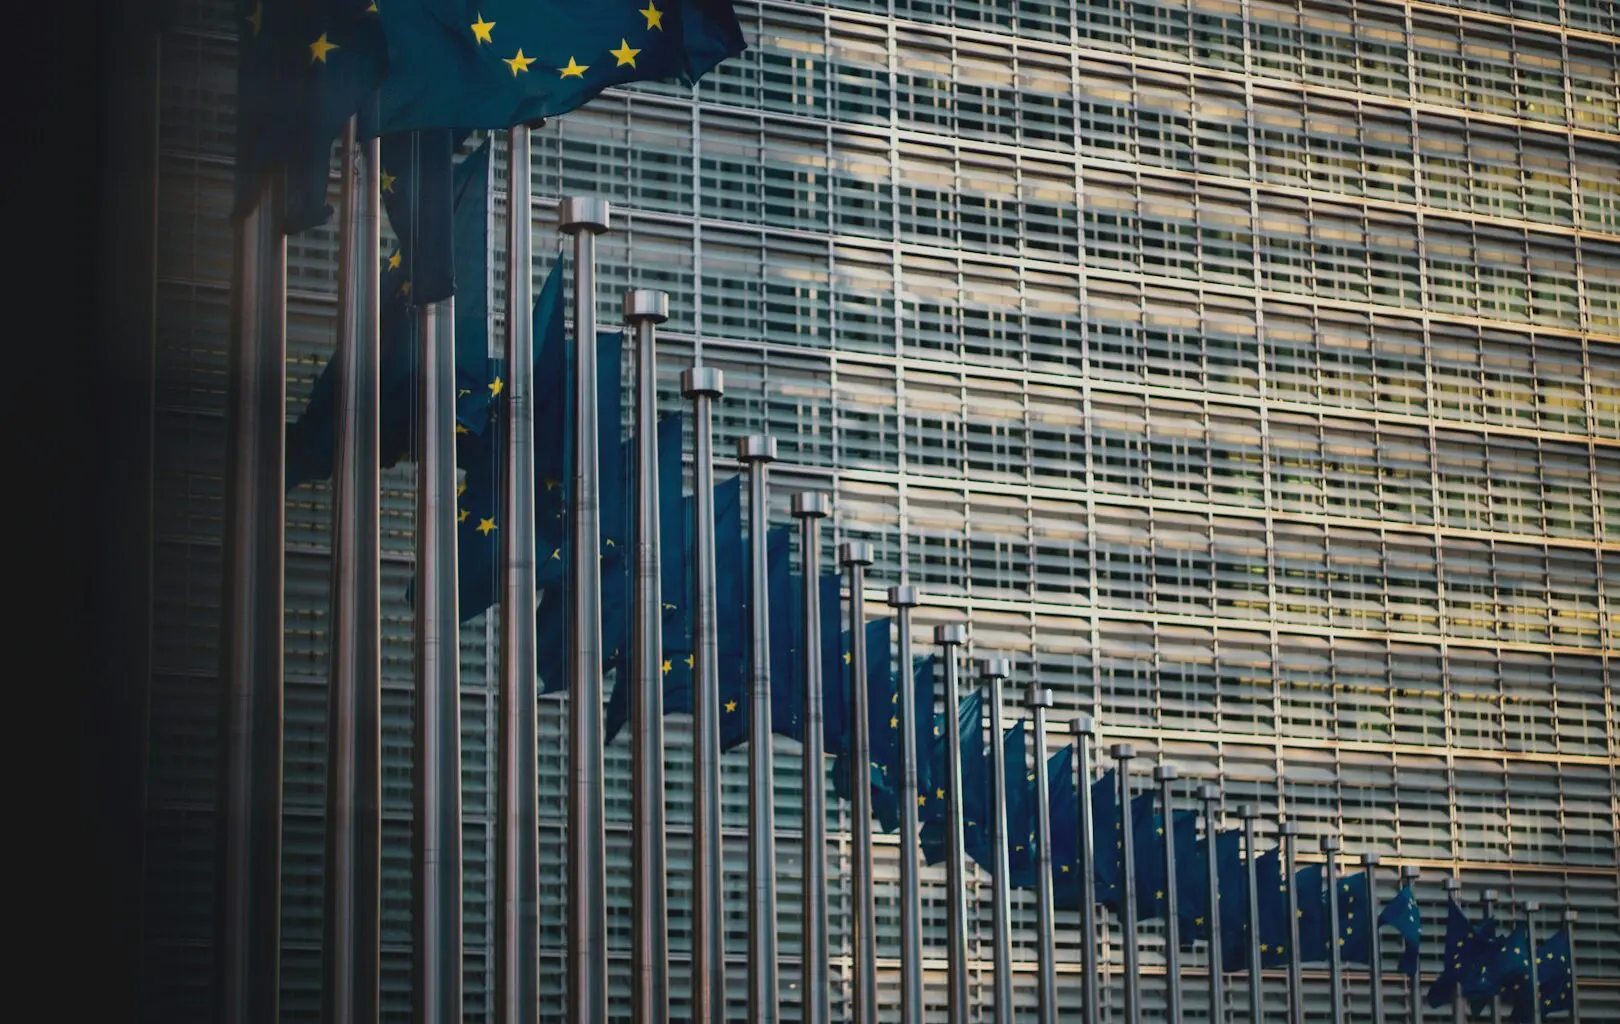 A row of European Union flags waves outside a modern glass-fronted building. The flags feature the distinctive blue background with yellow stars, symbolizing unity and cooperation among EU member countries.